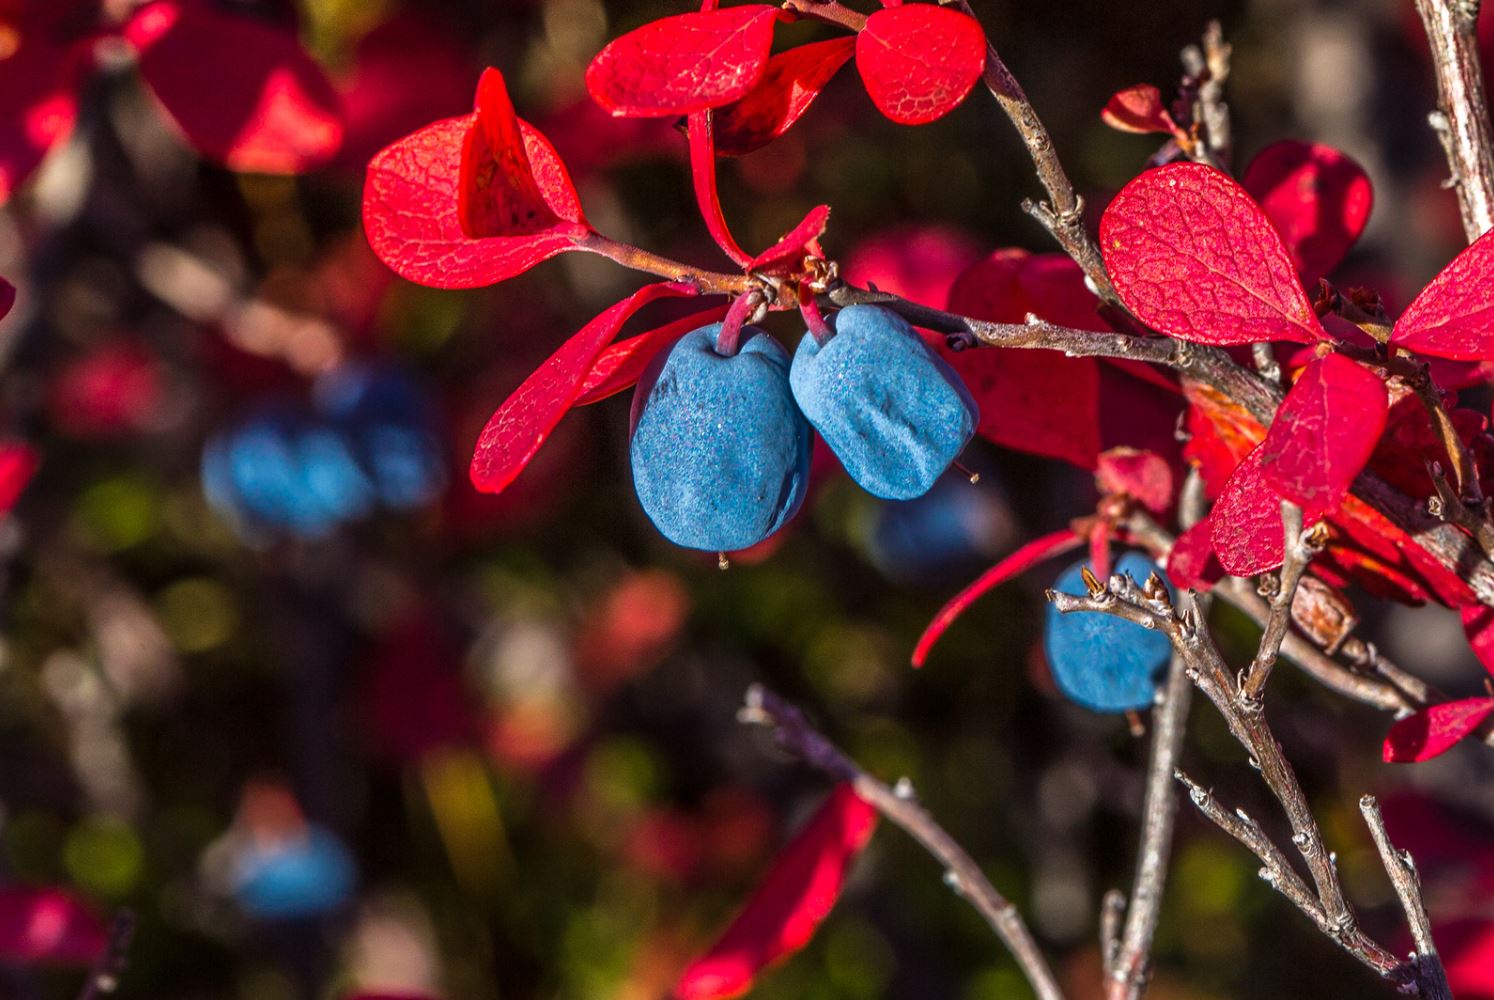 Blueberries fourish in mid-September in Denali National Park and Preserve.